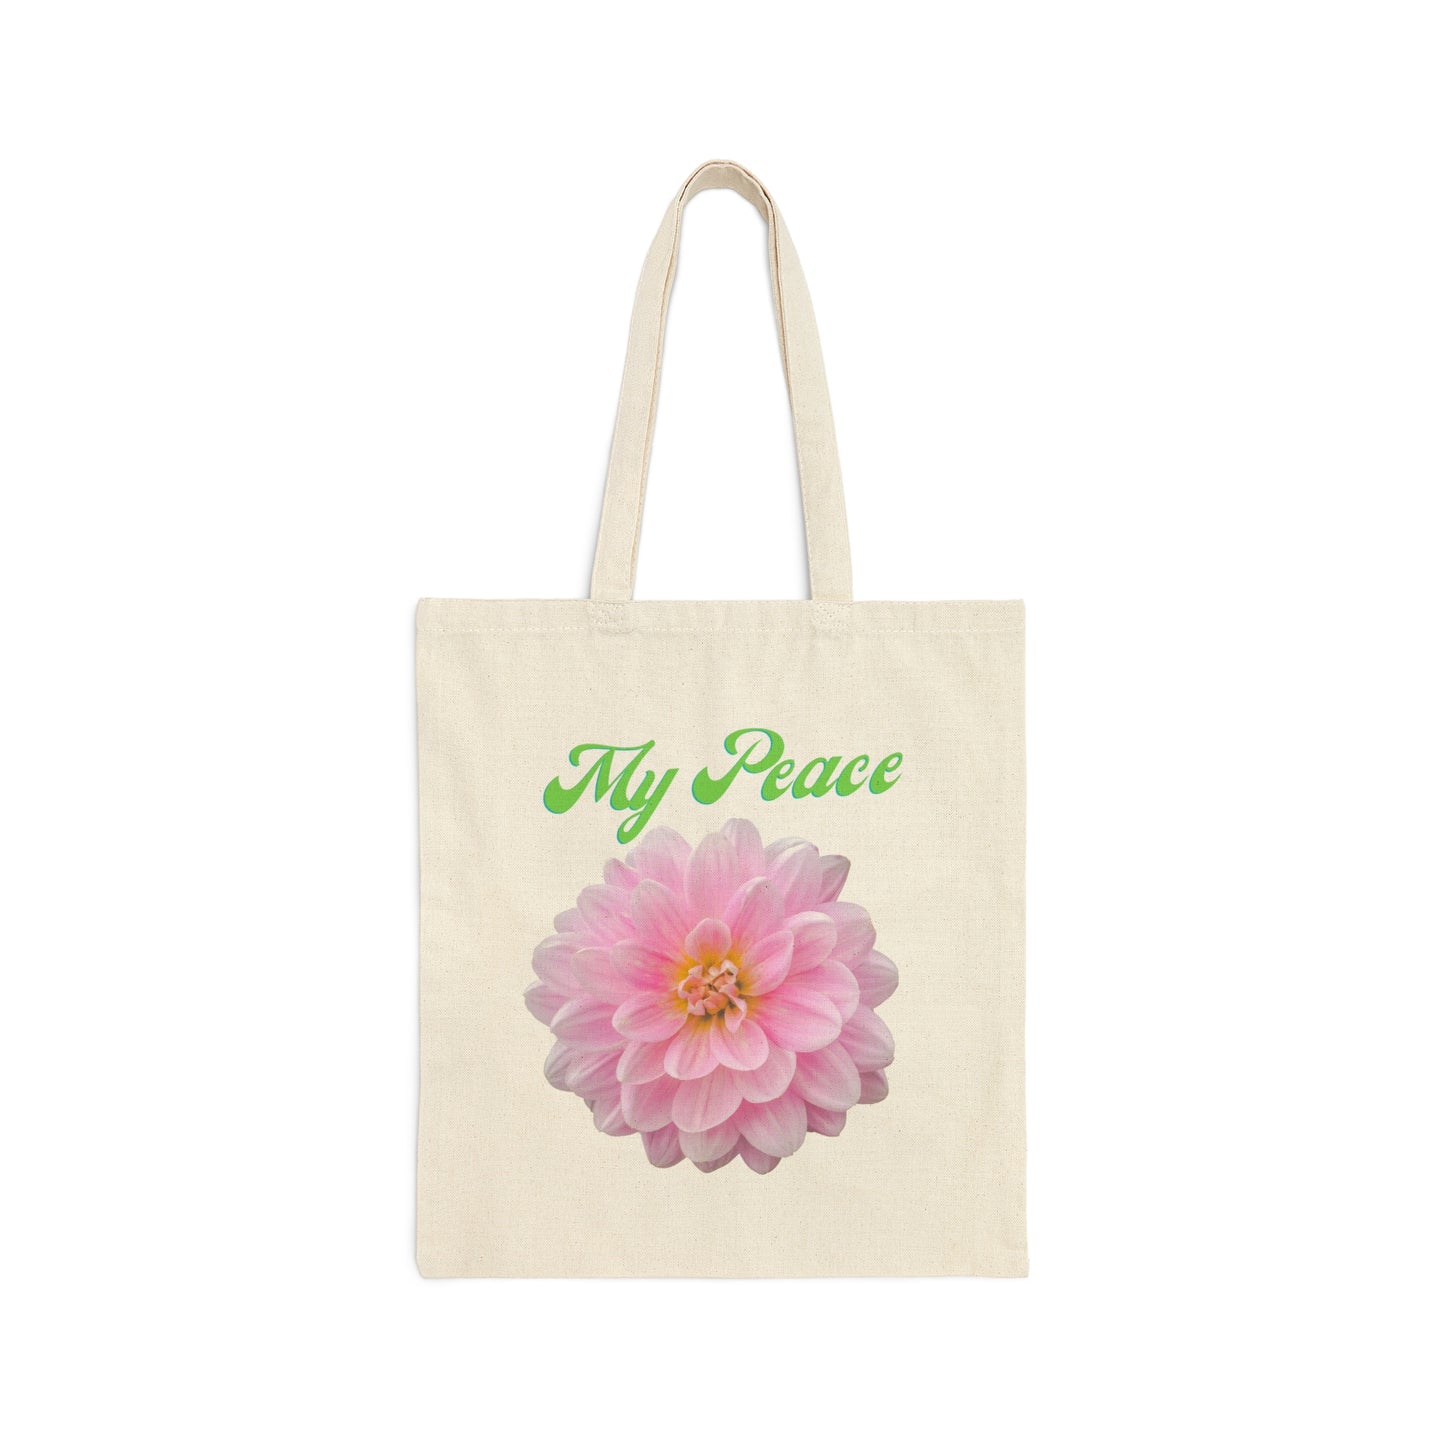 Pink Peony Flower Design Canvas Statement Tote Bag